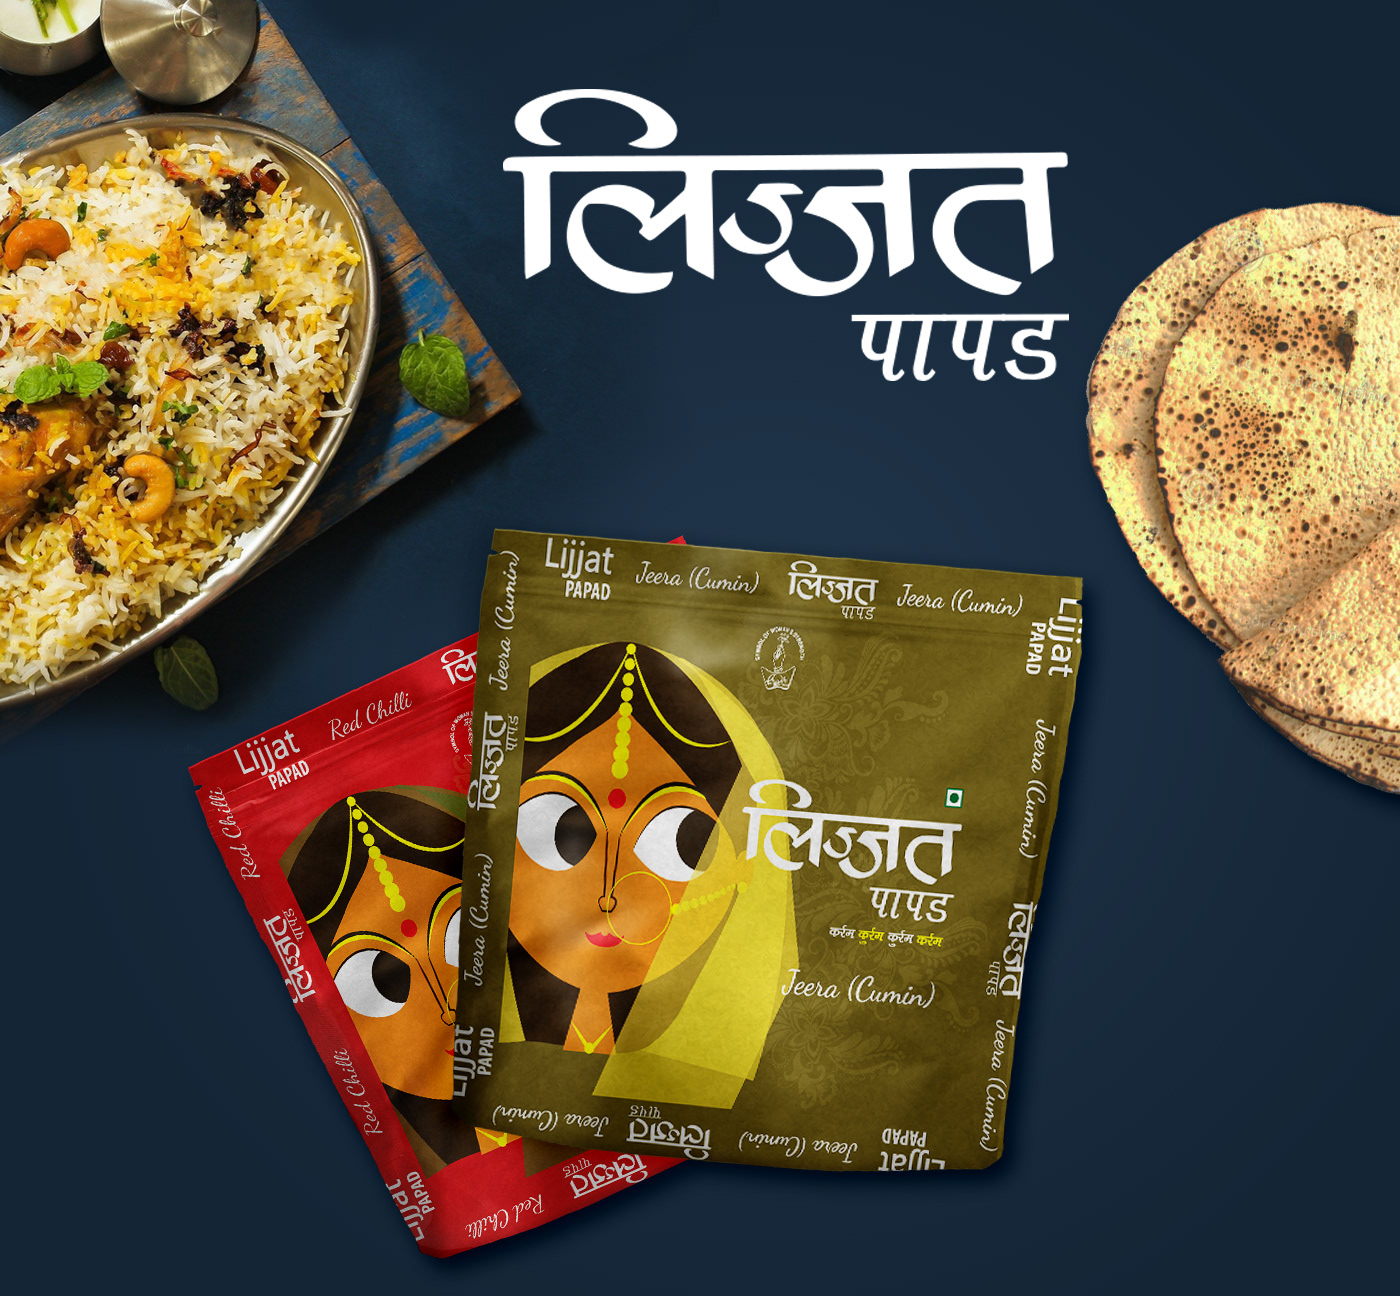 The Self-Empowering ‘Seven Bens’ who laid the foundation of famous ‘Lijjat Papad’